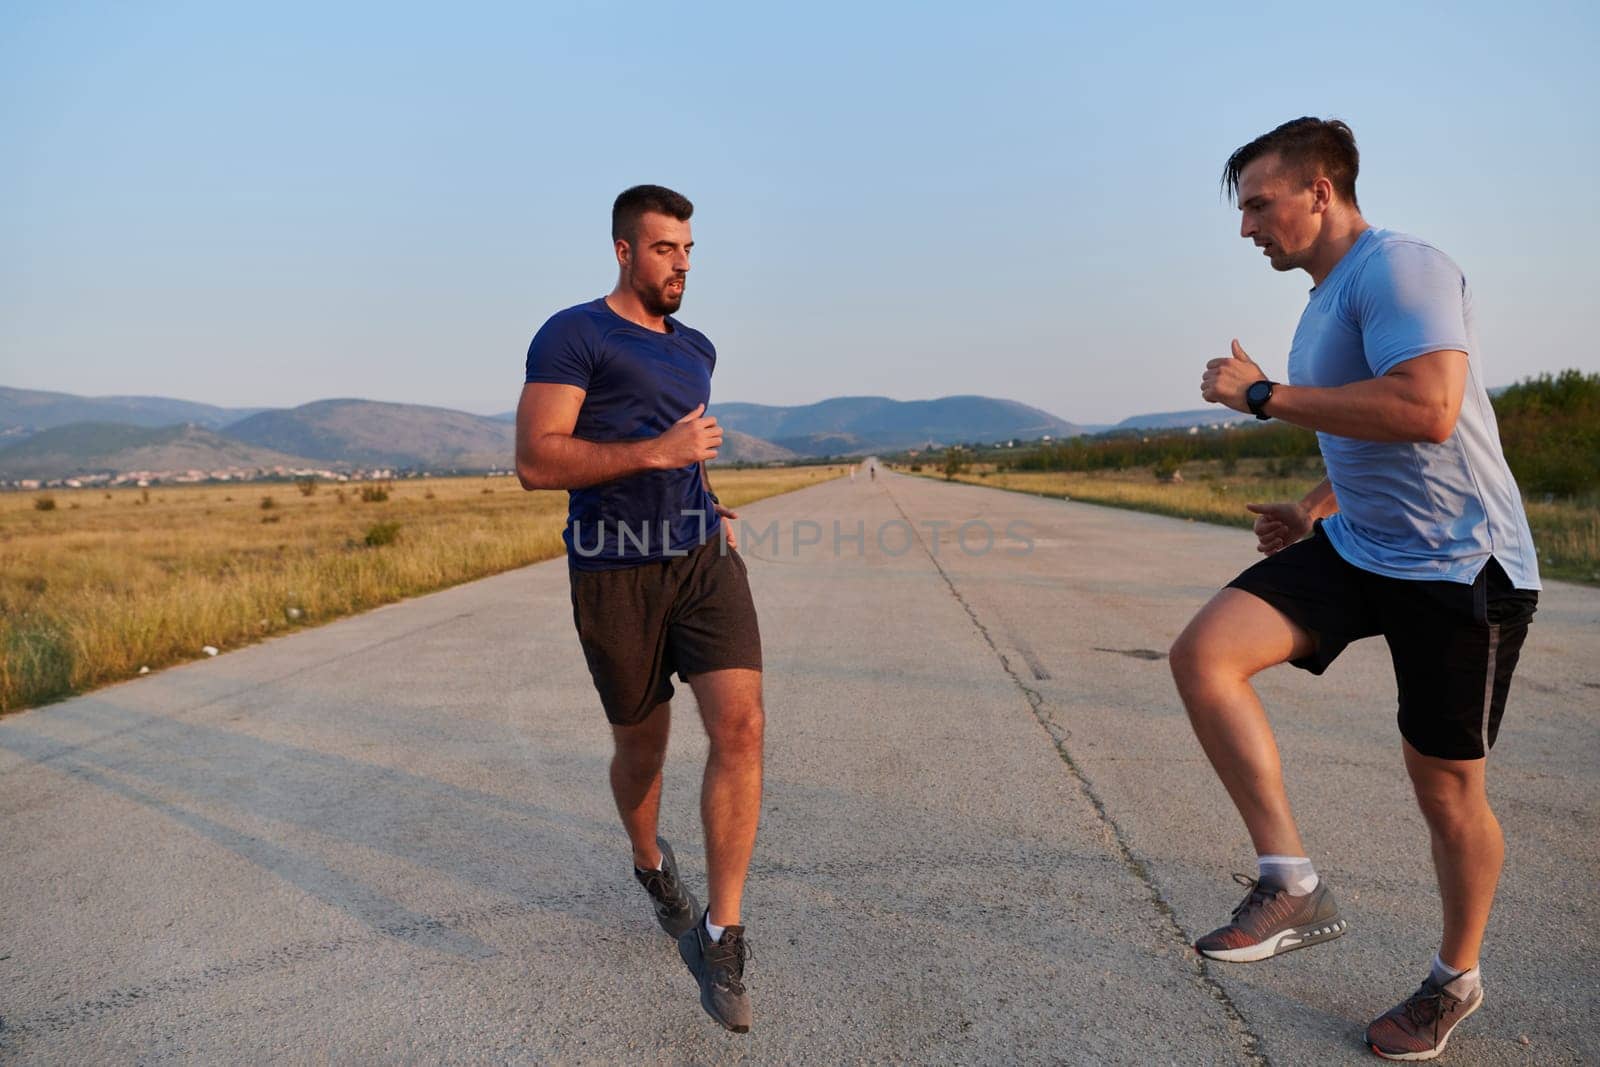 In anticipation of an upcoming marathon competition, two athletic friends train side by side, embodying the spirit of teamwork, dedication, and mutual support in their shared fitness journey.